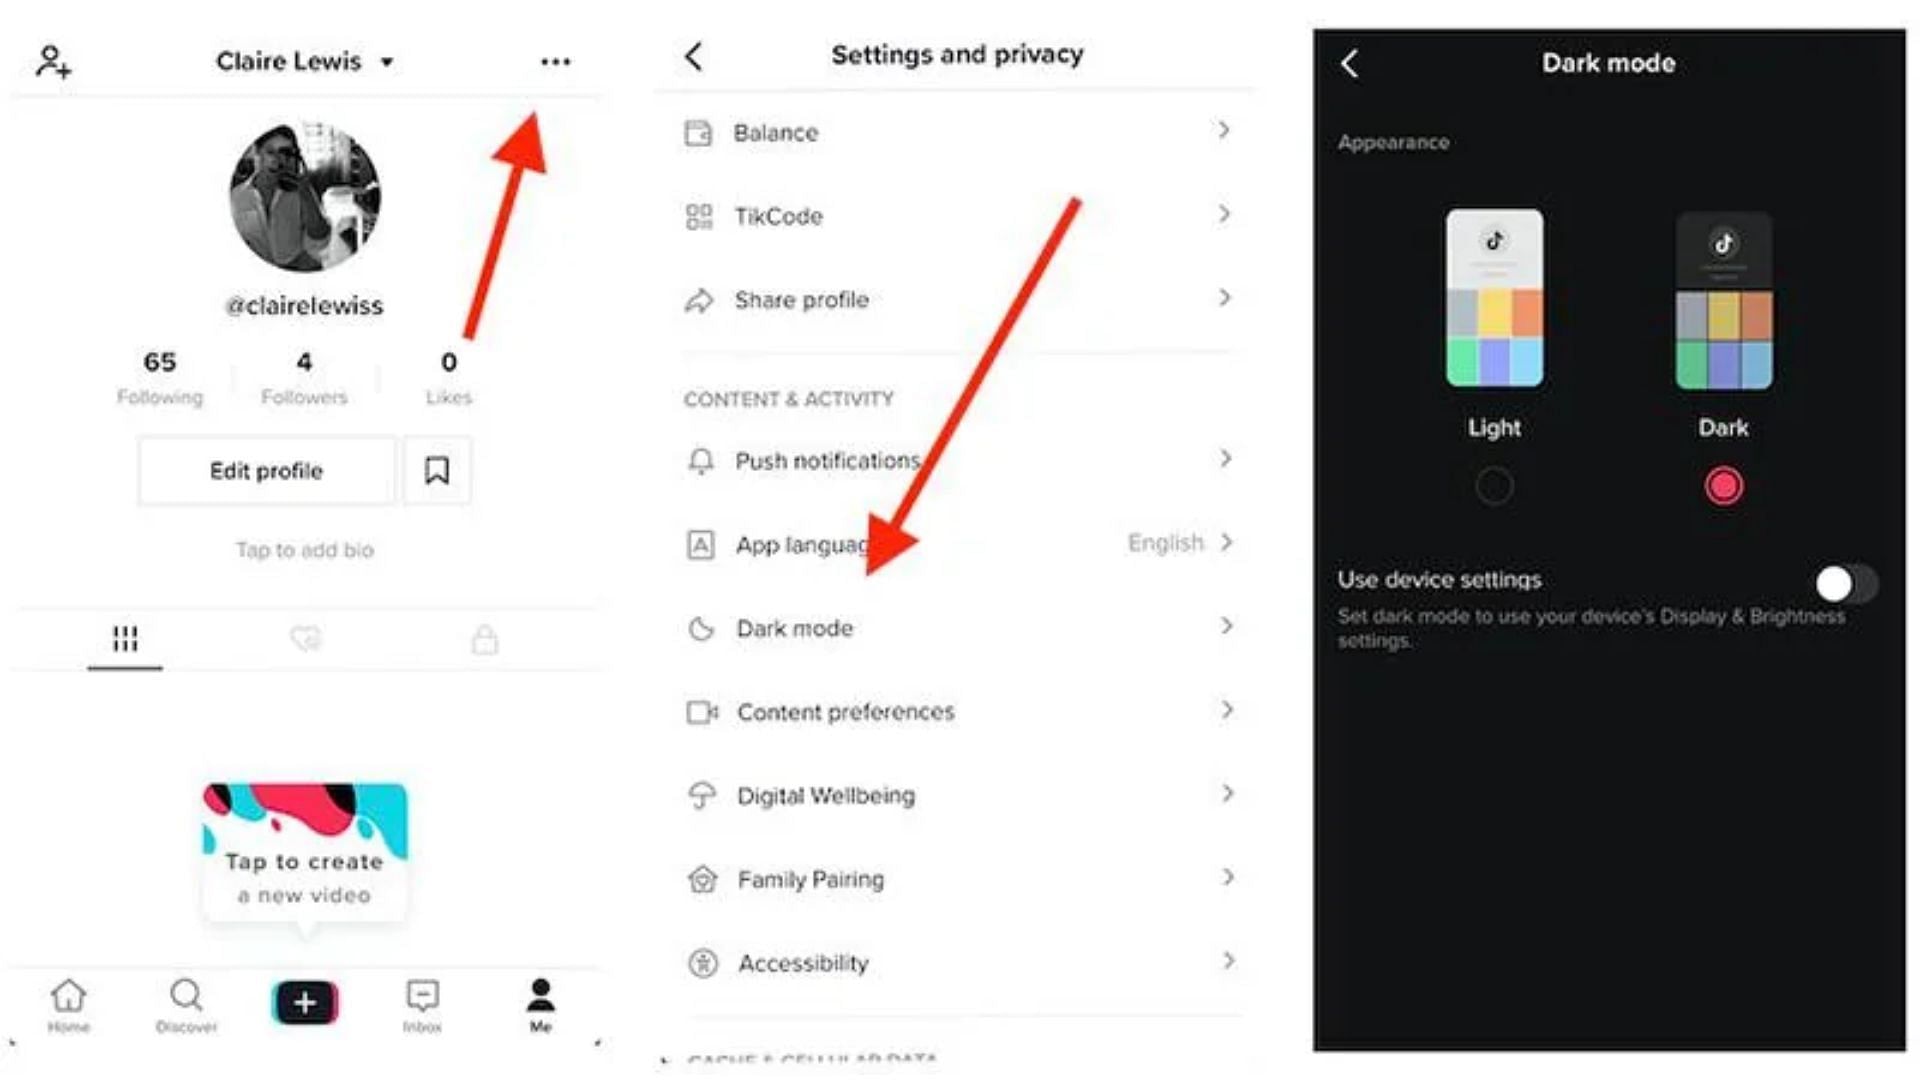 TikTok has a built-in dark mode in Android now